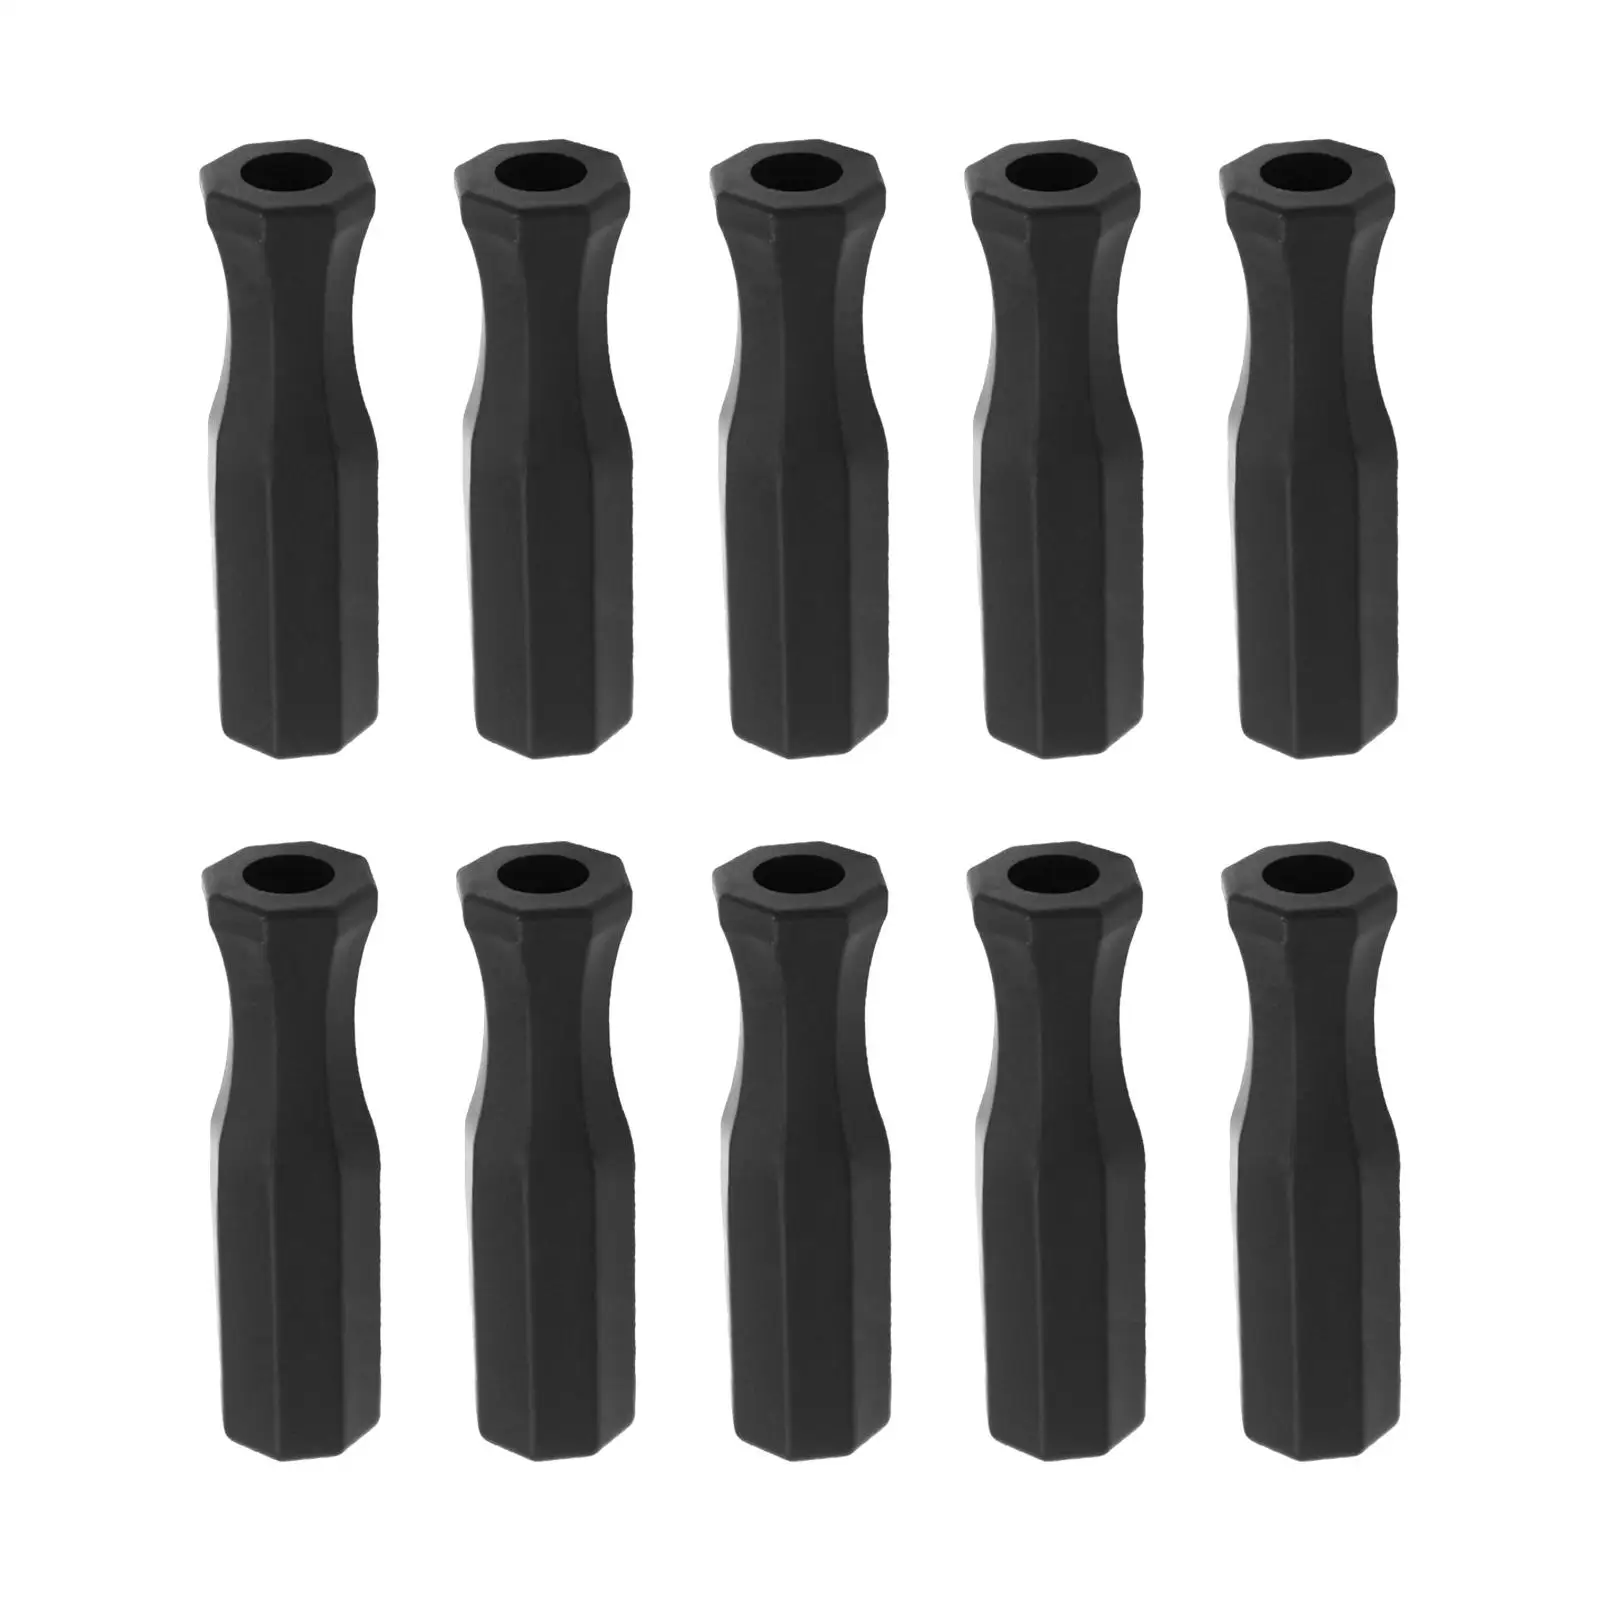 Table Soccer Handle 10Pcs Foosball Soccer Handle Grip Replacement Handle Parts